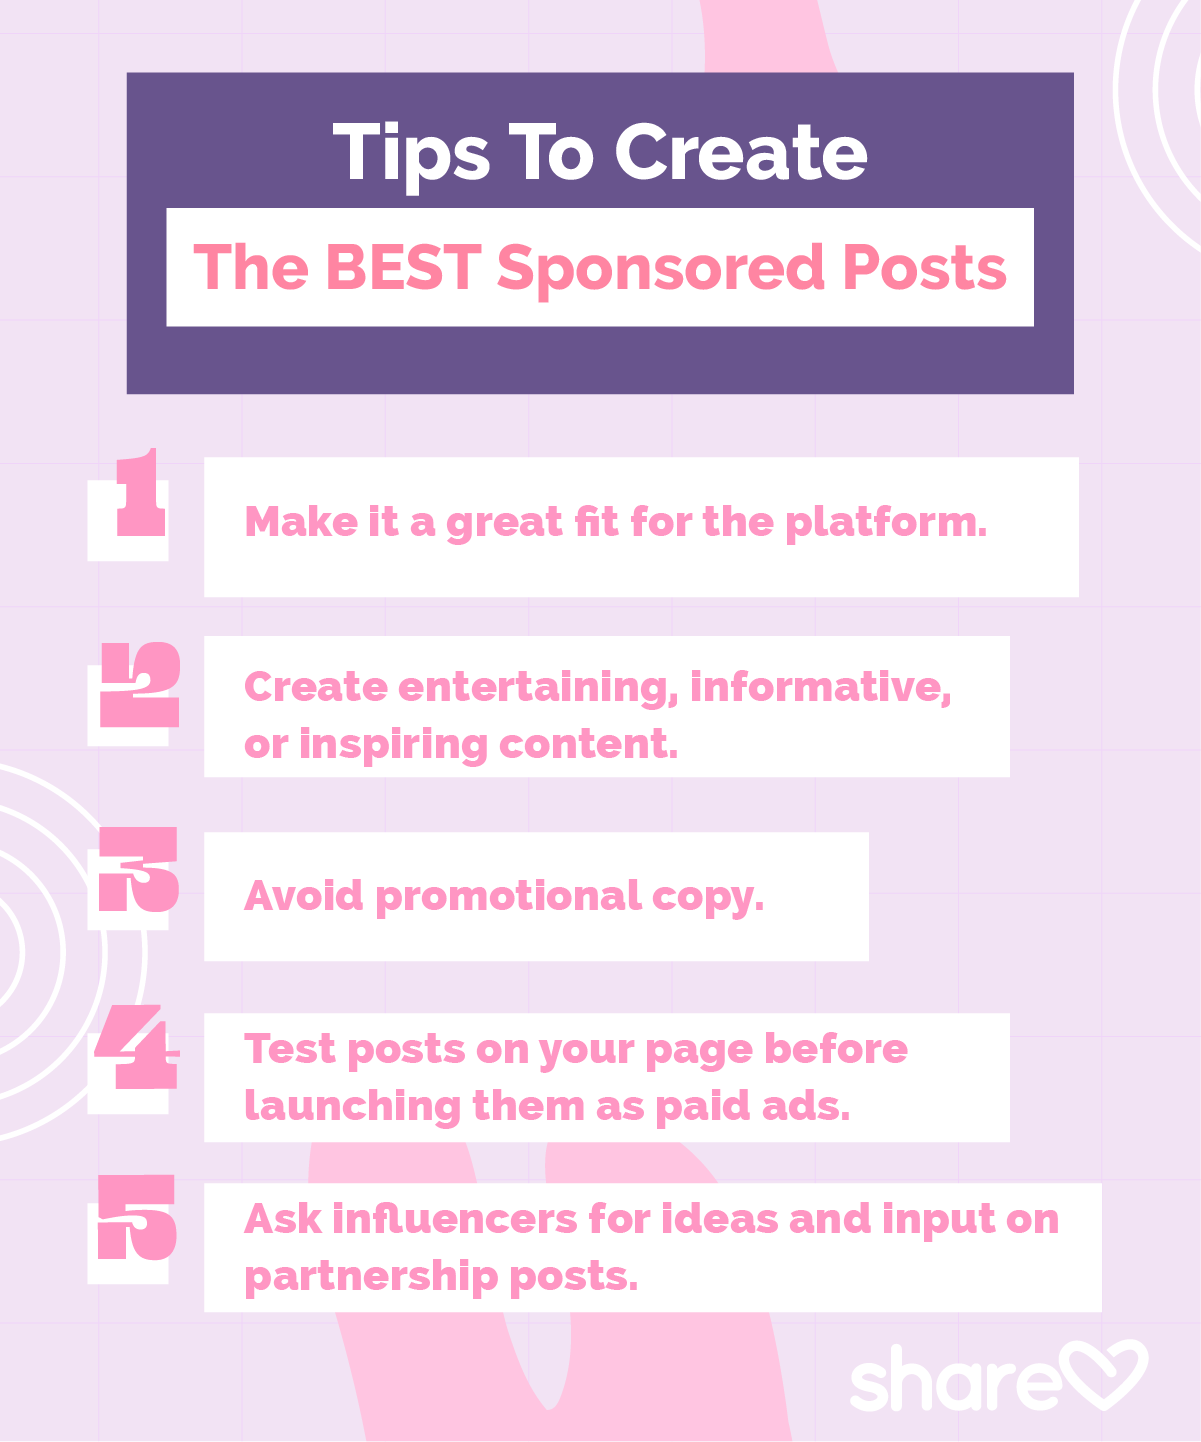 Tips to create the best sponsored posts